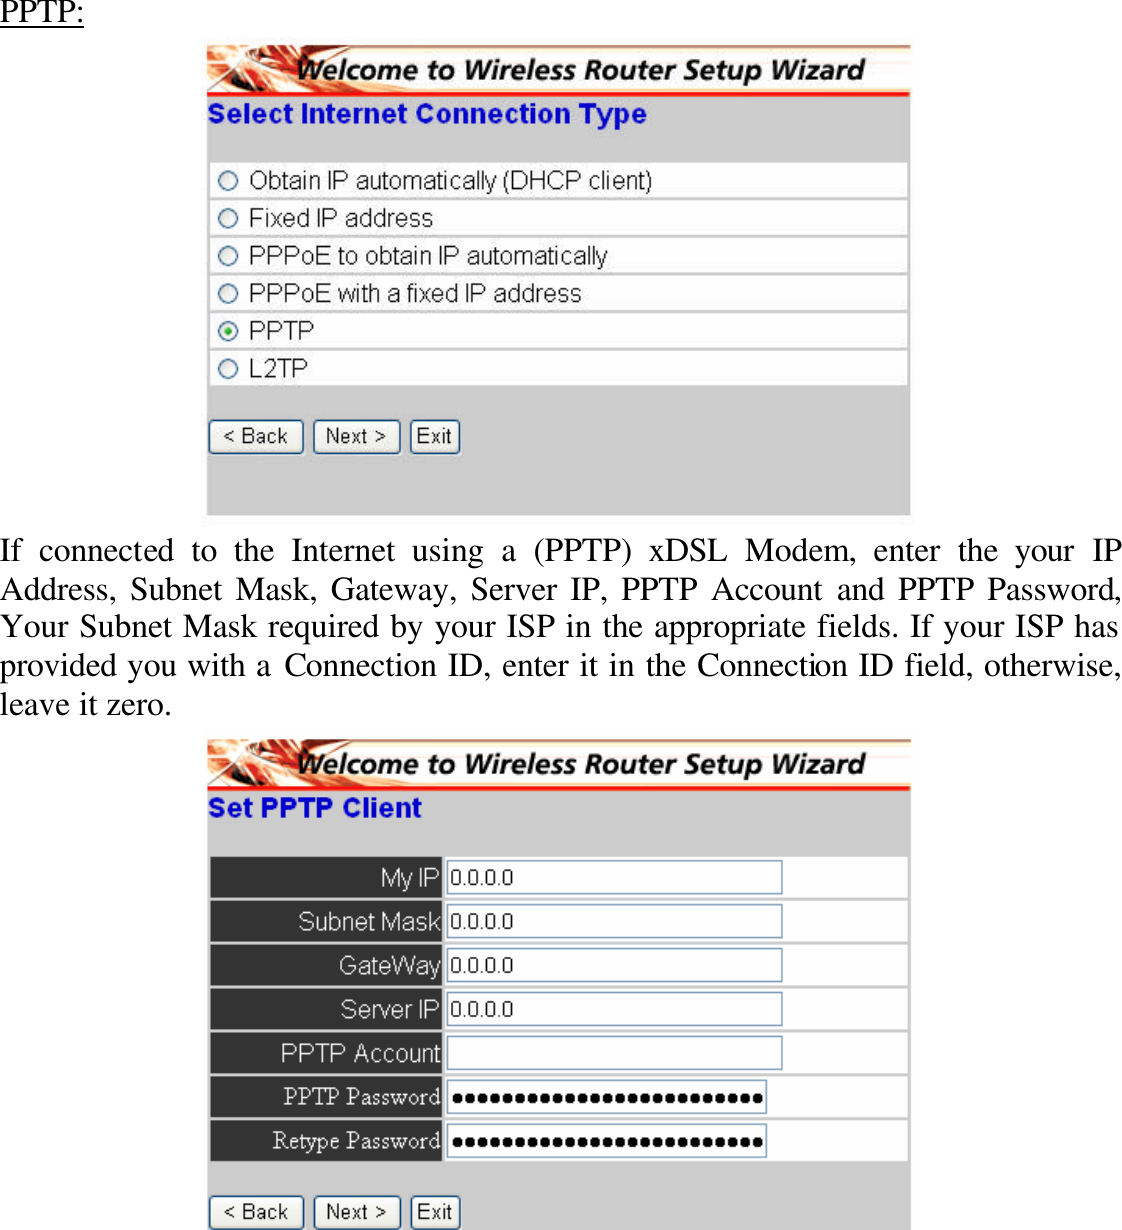 PPTP:  If connected to the Internet using a (PPTP) xDSL Modem, enter the your IP Address, Subnet Mask, Gateway, Server IP, PPTP Account and PPTP Password, Your Subnet Mask required by your ISP in the appropriate fields. If your ISP has provided you with a Connection ID, enter it in the Connection ID field, otherwise, leave it zero.    